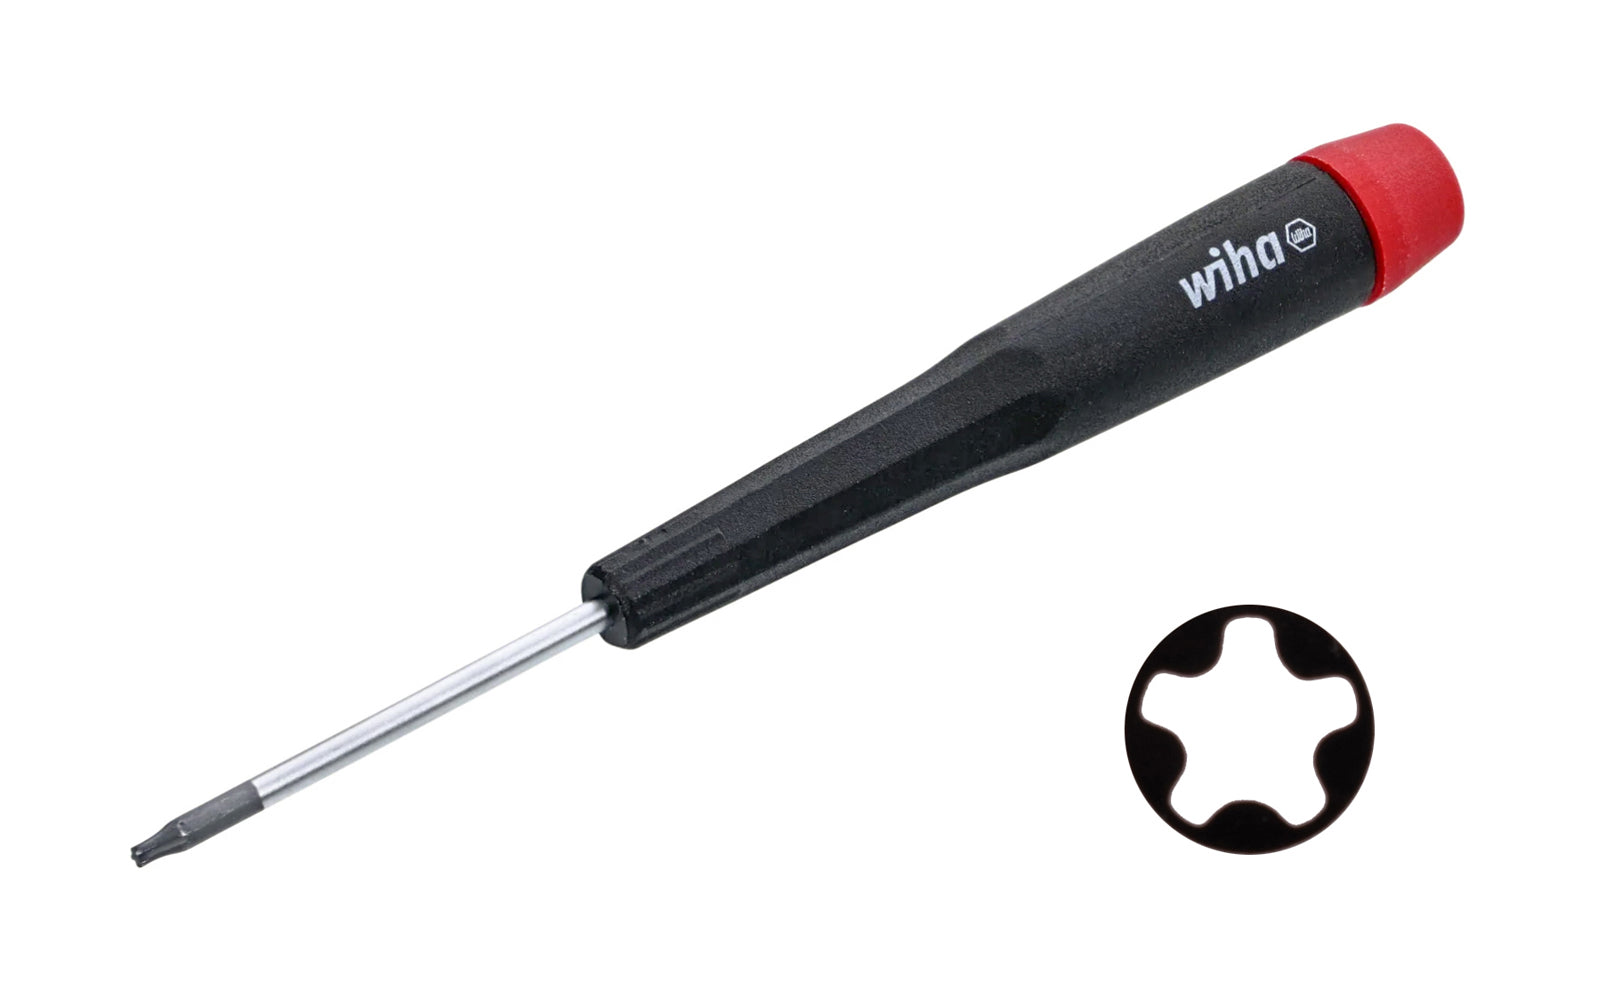 Wiha pentalobe precision screwdriver made out of hardened CRM72 tool steel. Excellent for working on small components & modern electronics. Easy spin control cap. Available in  PL1,  PL2,  PL3,  PL4,  PL5,  PL6  sizes. 5 point precision screwdriver. Star drive precision screwdriver for Apple products. Made in Germany. 